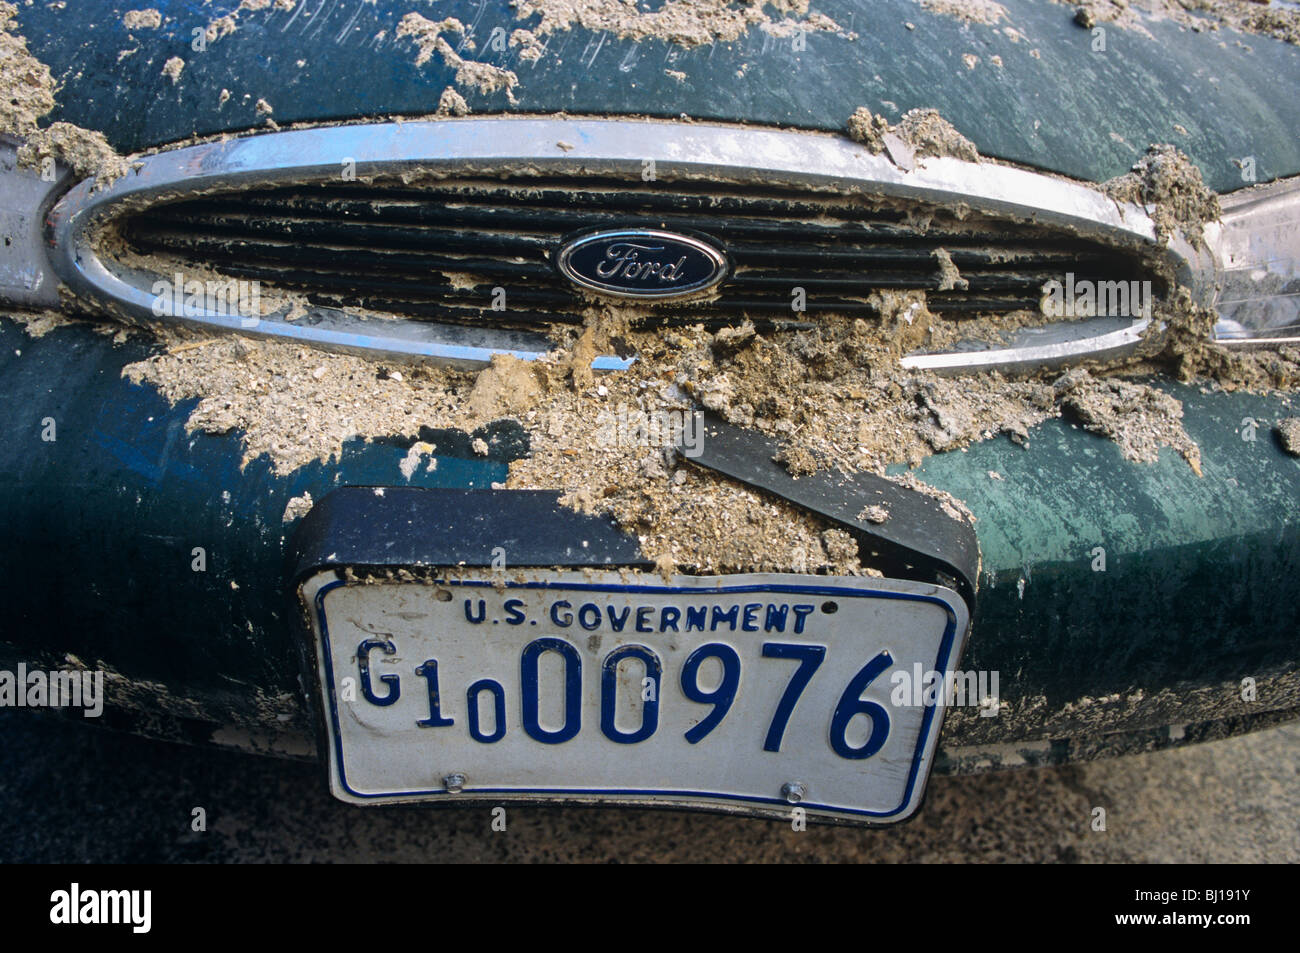 Front grill and bonnet (hood) paintwork of a parked damaged US Government Ford car near Ground Zero after 9/11 attacks Stock Photo